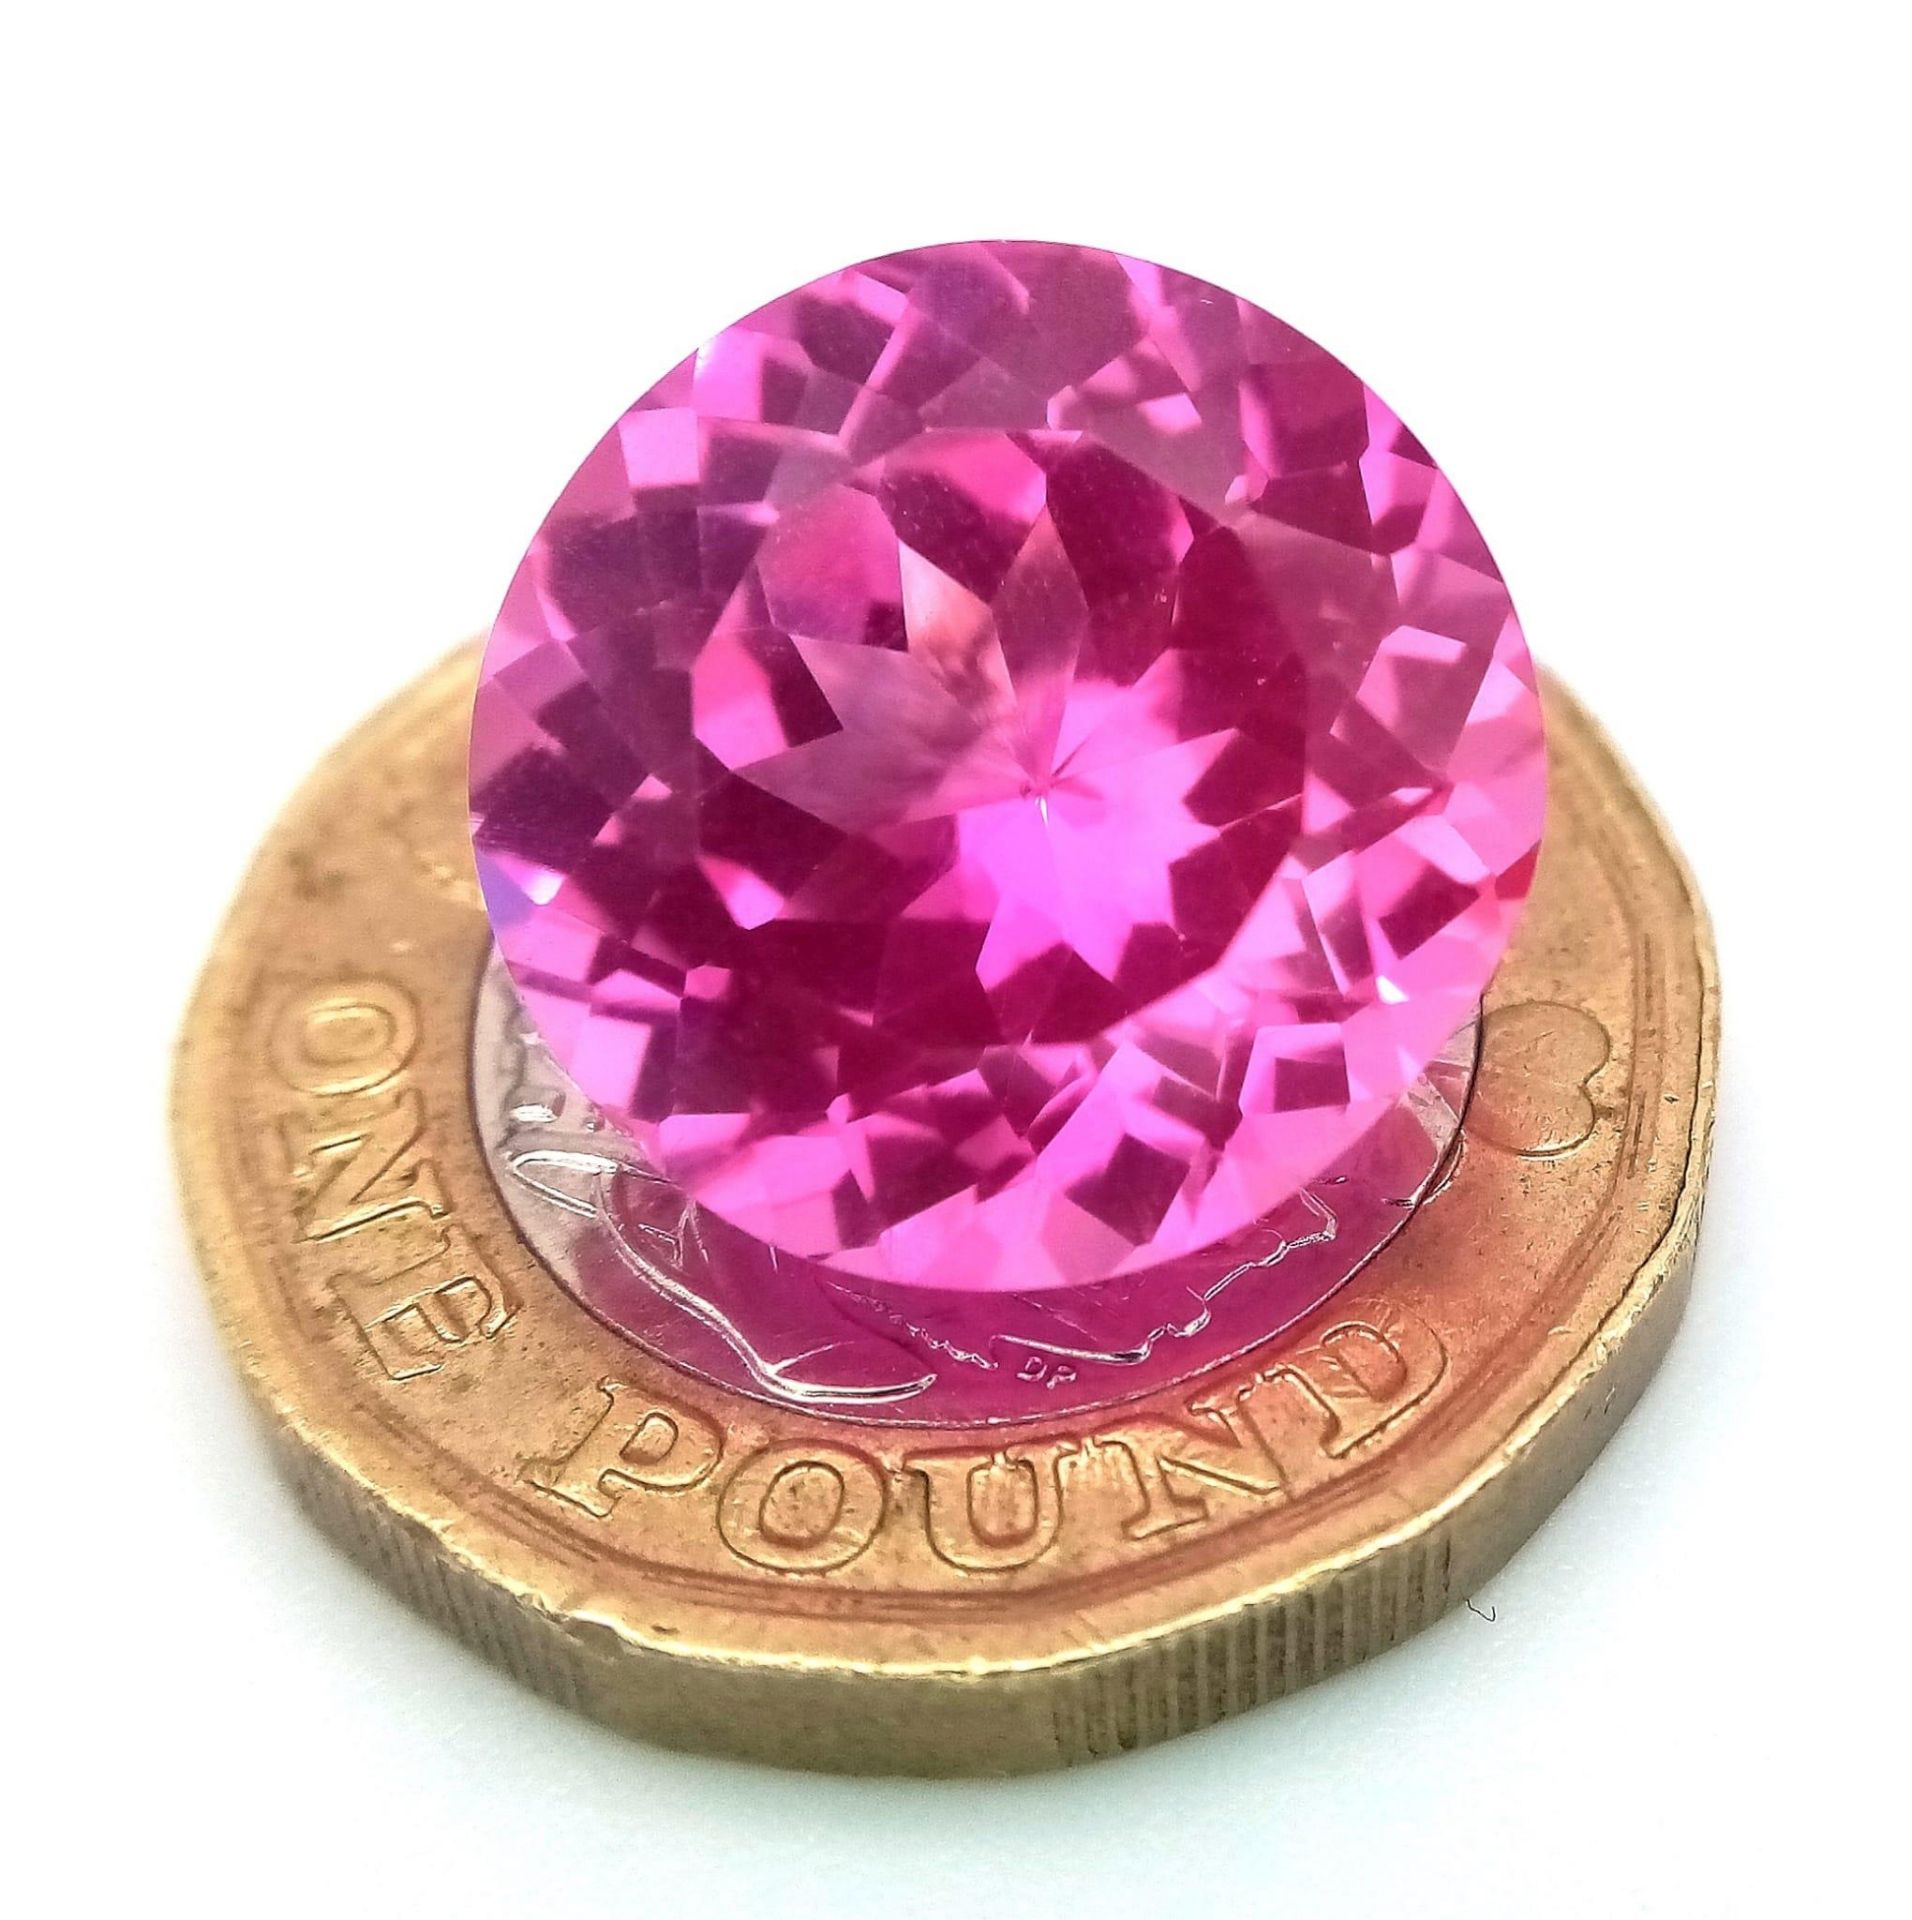 A Beautiful 18ct Pink Kunzite Gemstone. Round cut. No visible marks or inclusions. No certificate so - Bild 2 aus 4